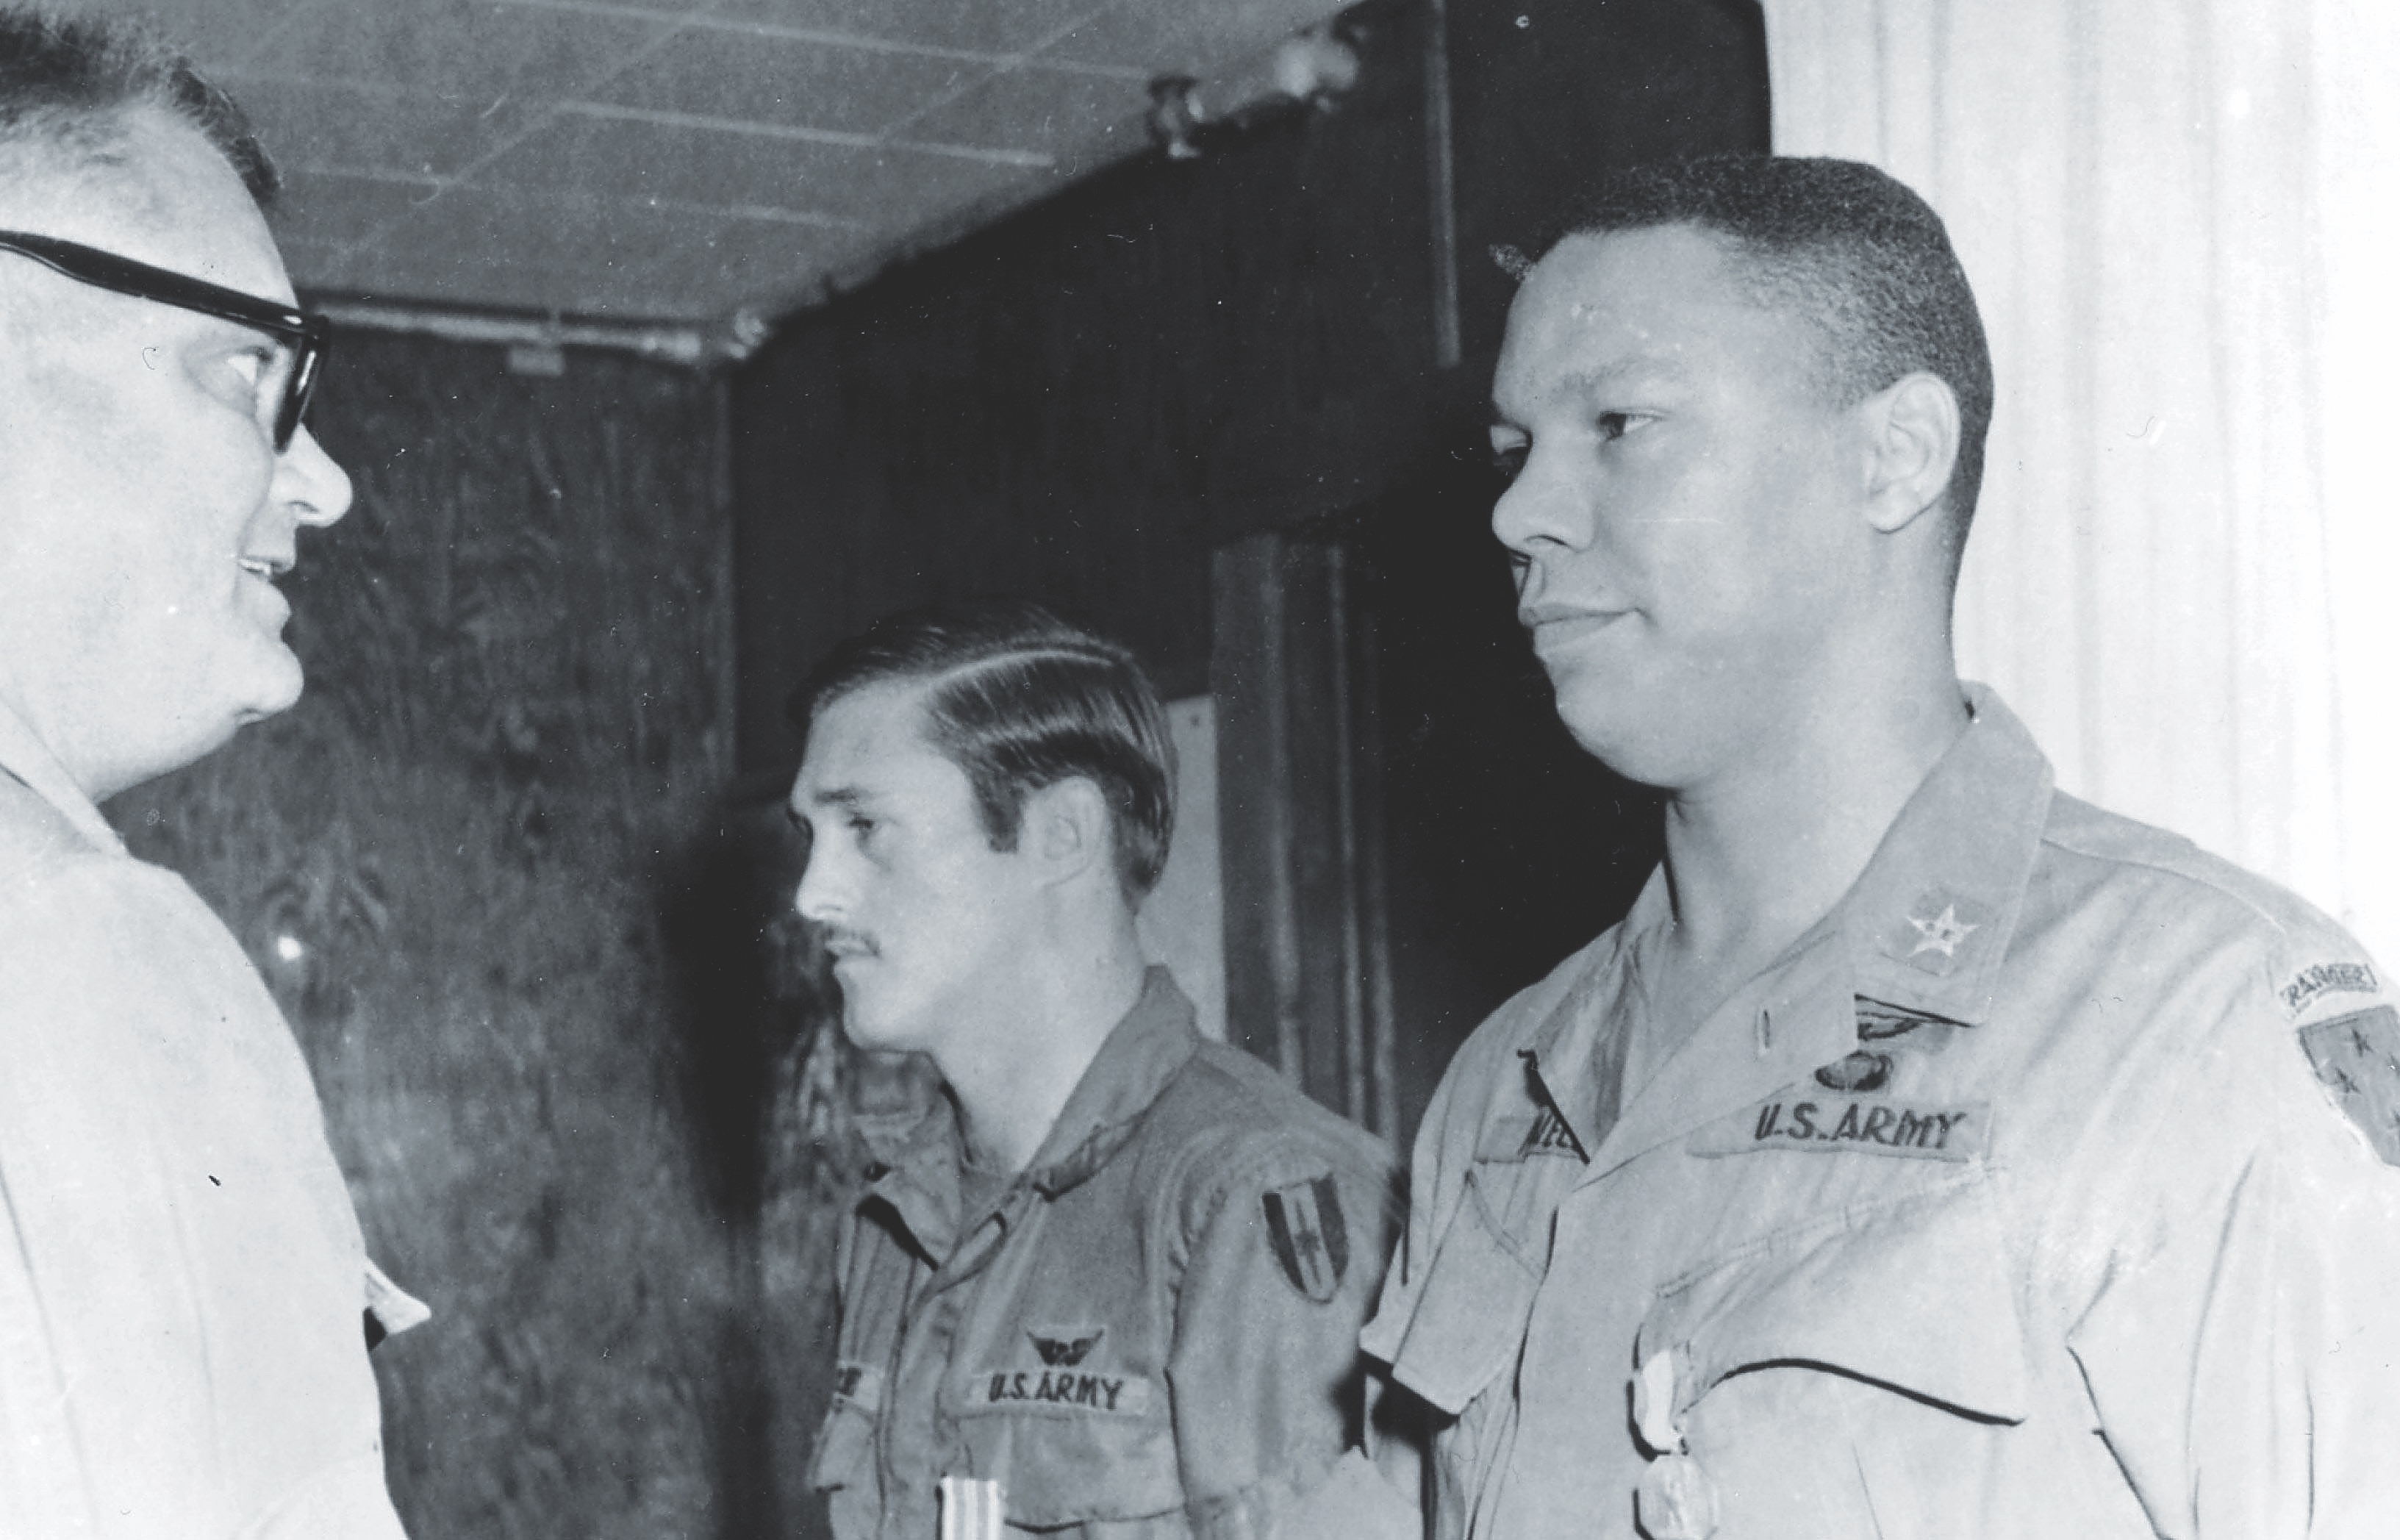 Powell receives the Soldier’s Medal for heroism from Gettys. (Courtesy Colin L. Powell)